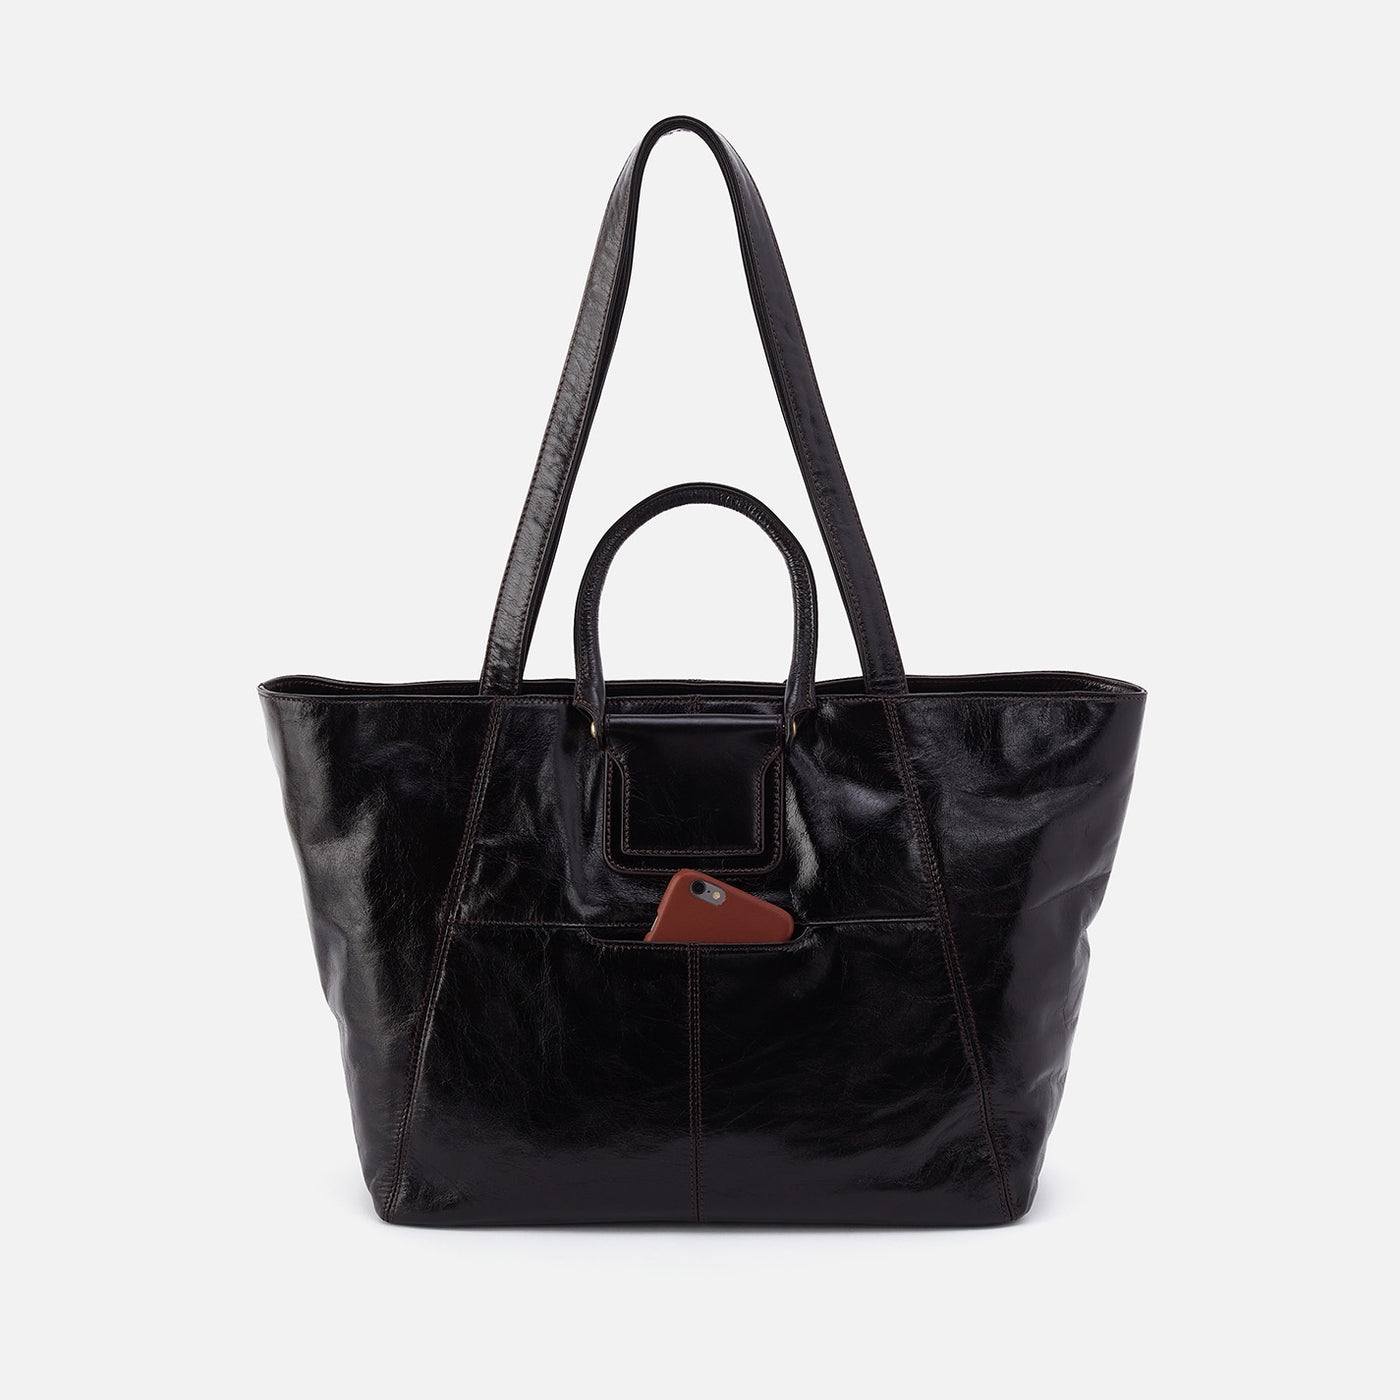 Sheila East-West Tote in Polished Leather - Black